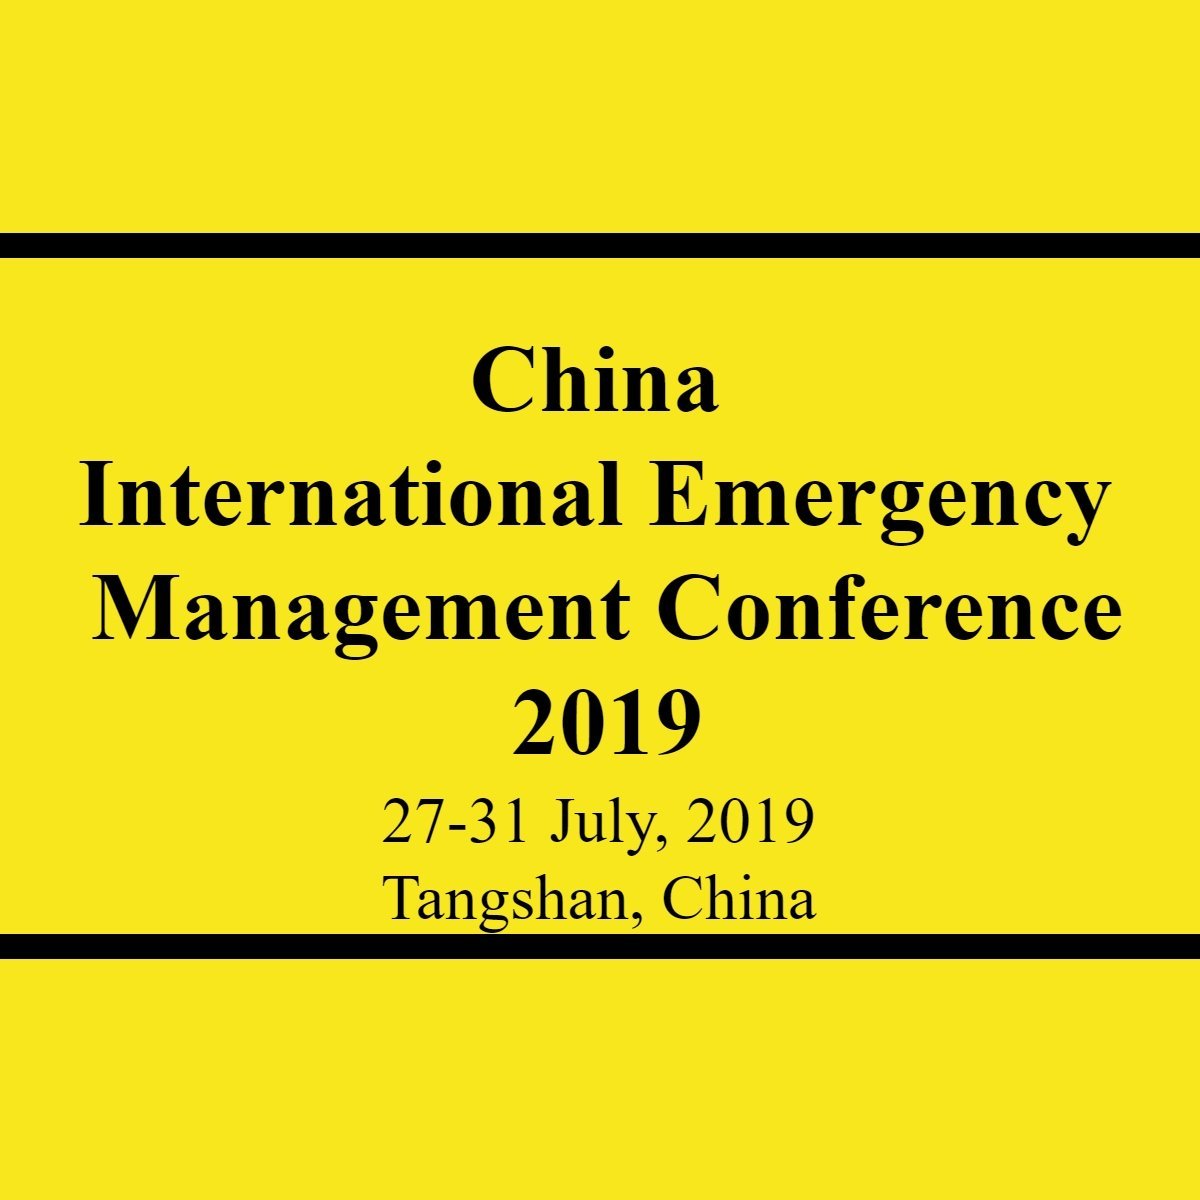 The First Emergency Conference sponsored by the National Development and Reform Commission
Date: July 27-31, 2019
Venue: Tangshan, China